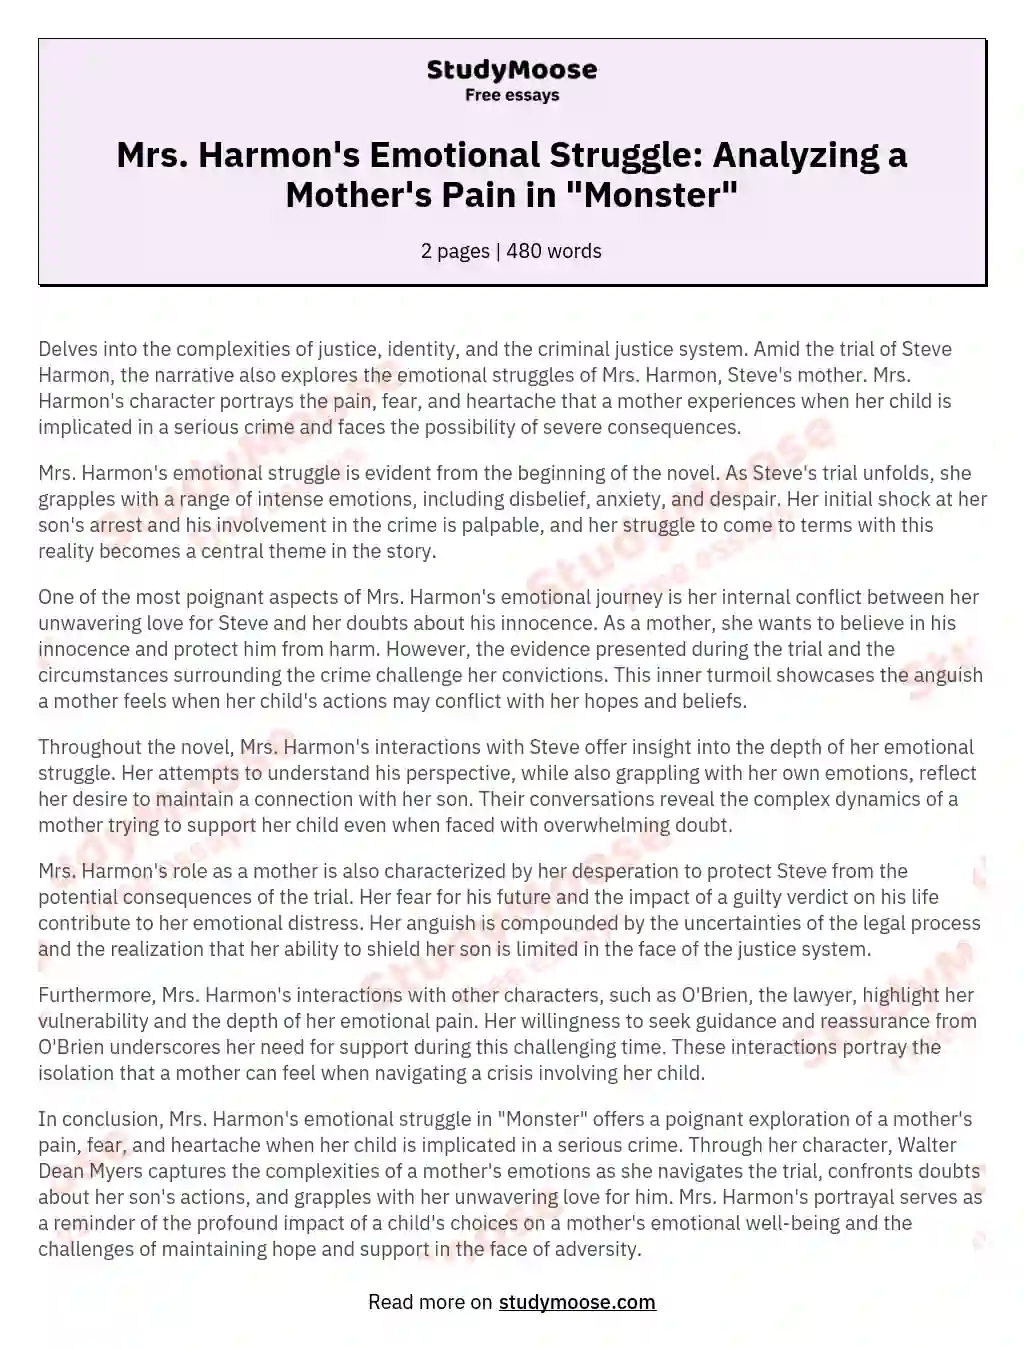 Mrs. Harmon's Emotional Struggle: Analyzing a Mother's Pain in "Monster" essay